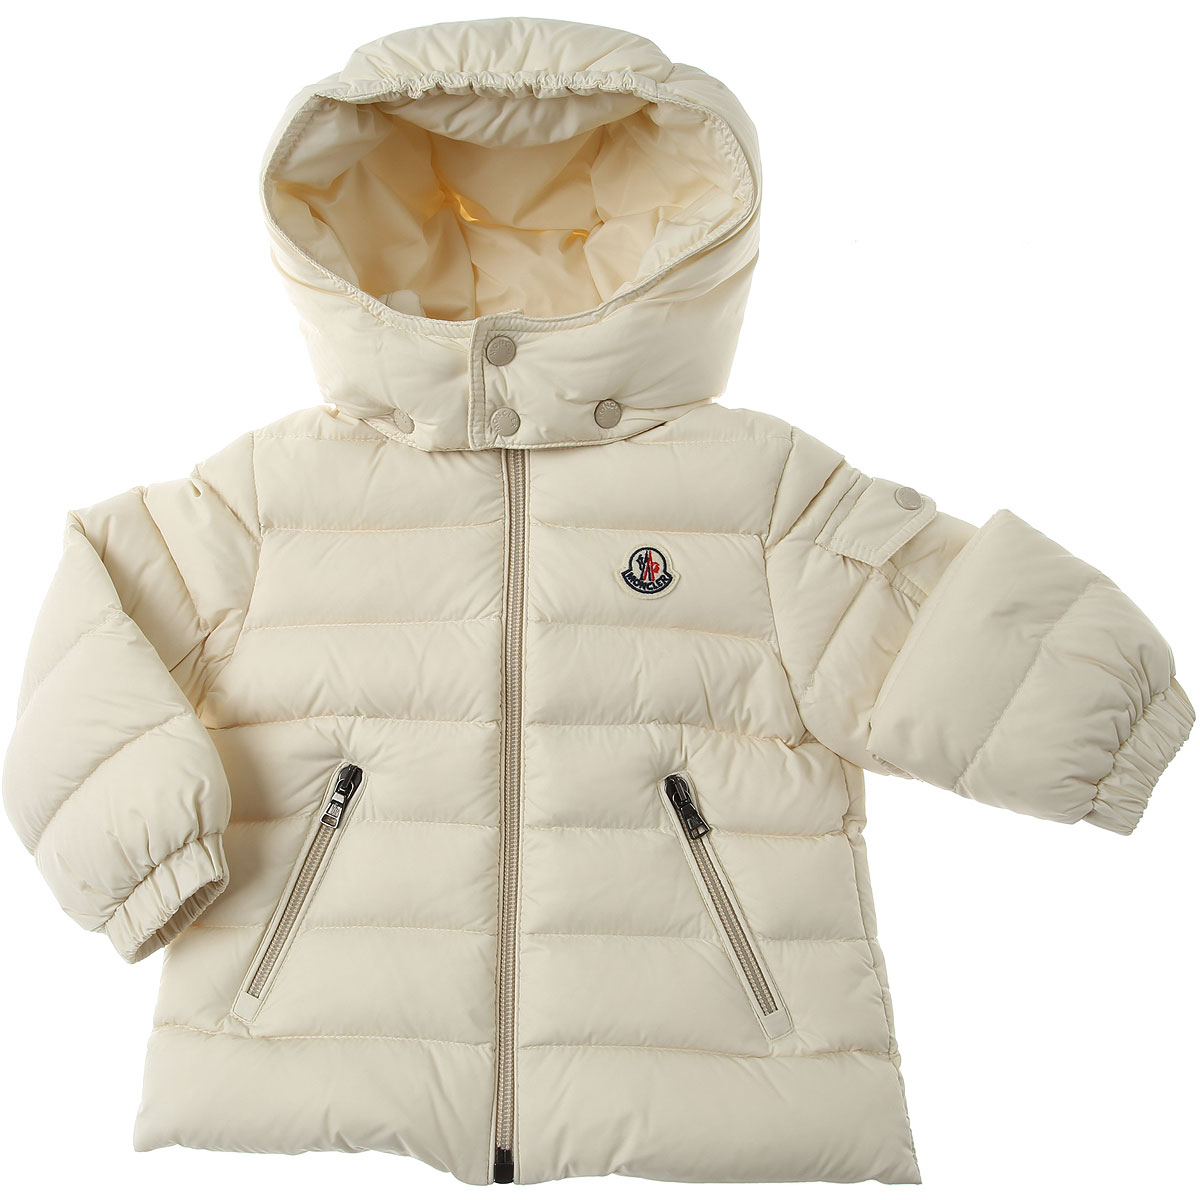 Baby Boy Clothing Moncler, Style code: 1a52500-53079-201